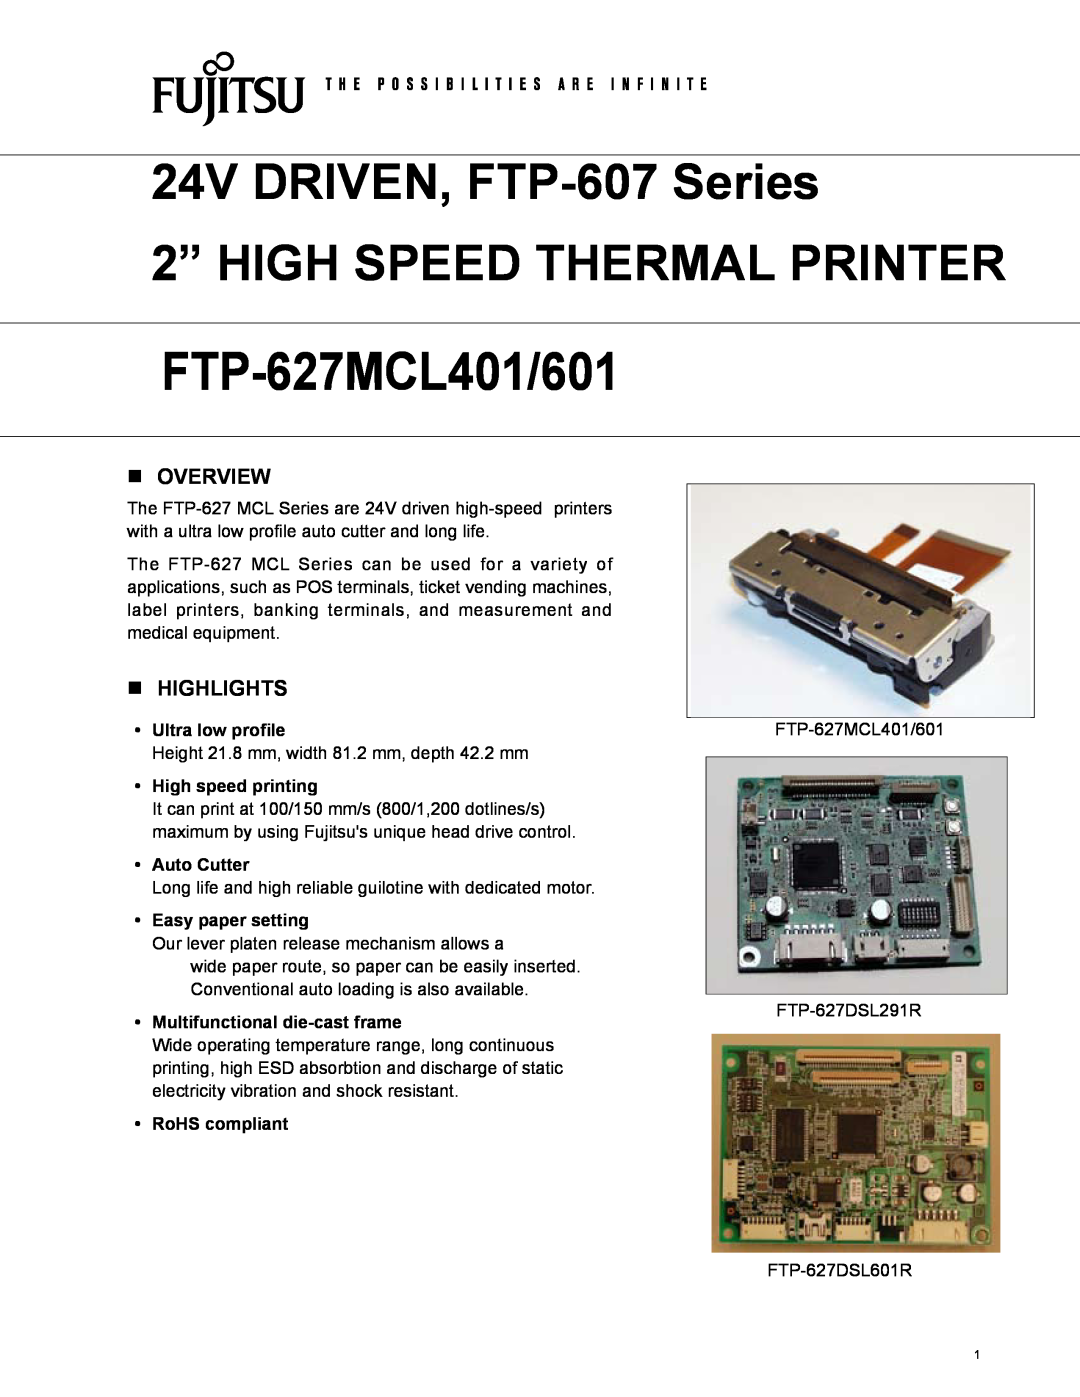 Fujitsu FTP-607 Series manual n Overview, n HIGHLIGHTS, Ultra low profile, High speed printing, Auto Cutter 